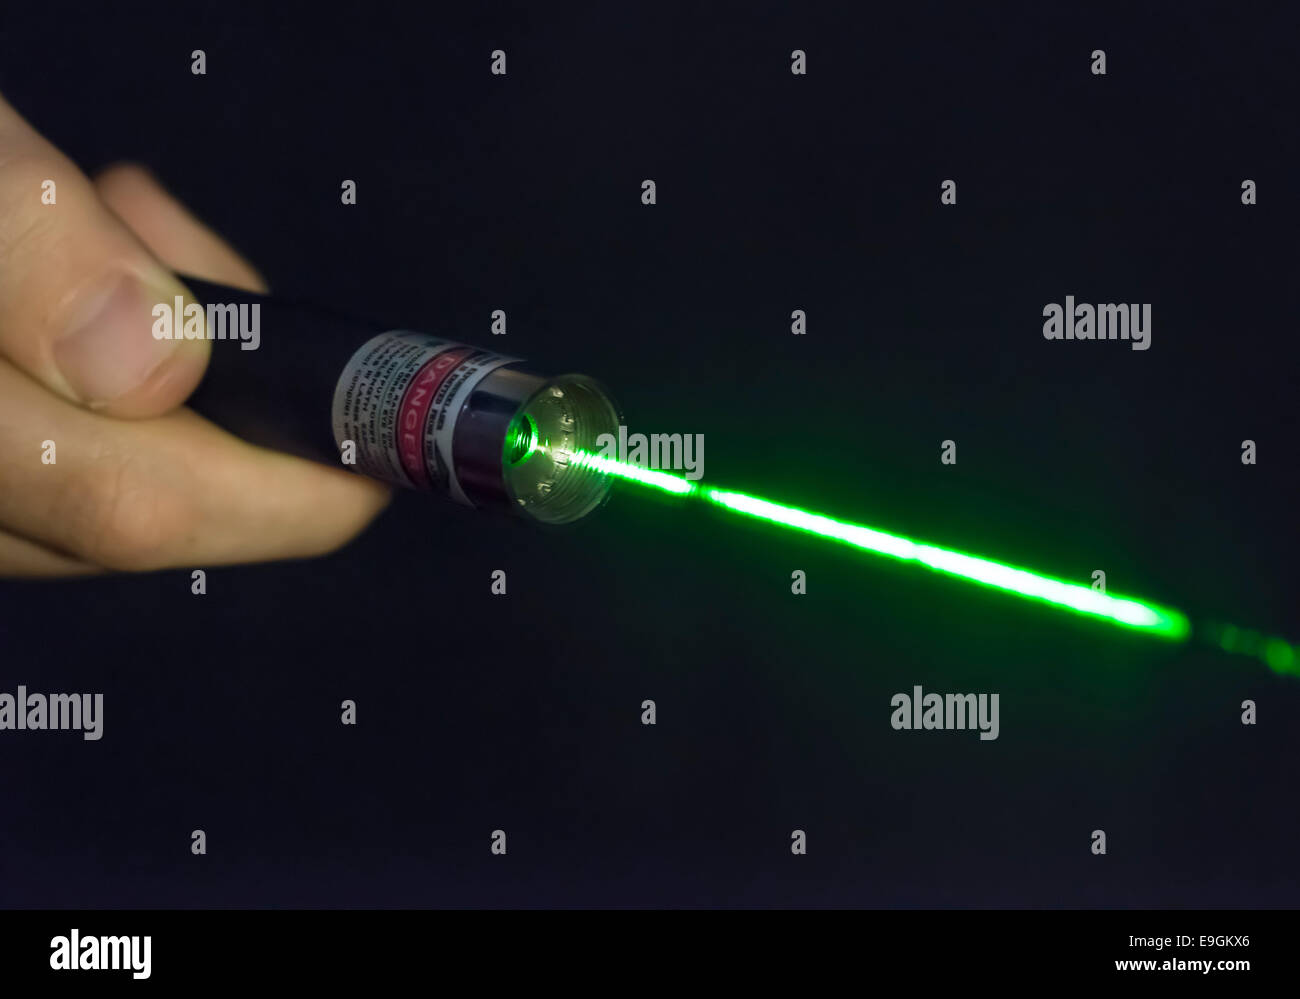 Bright green laser beam coming from a hand-held laser pointer device Stock  Photo - Alamy